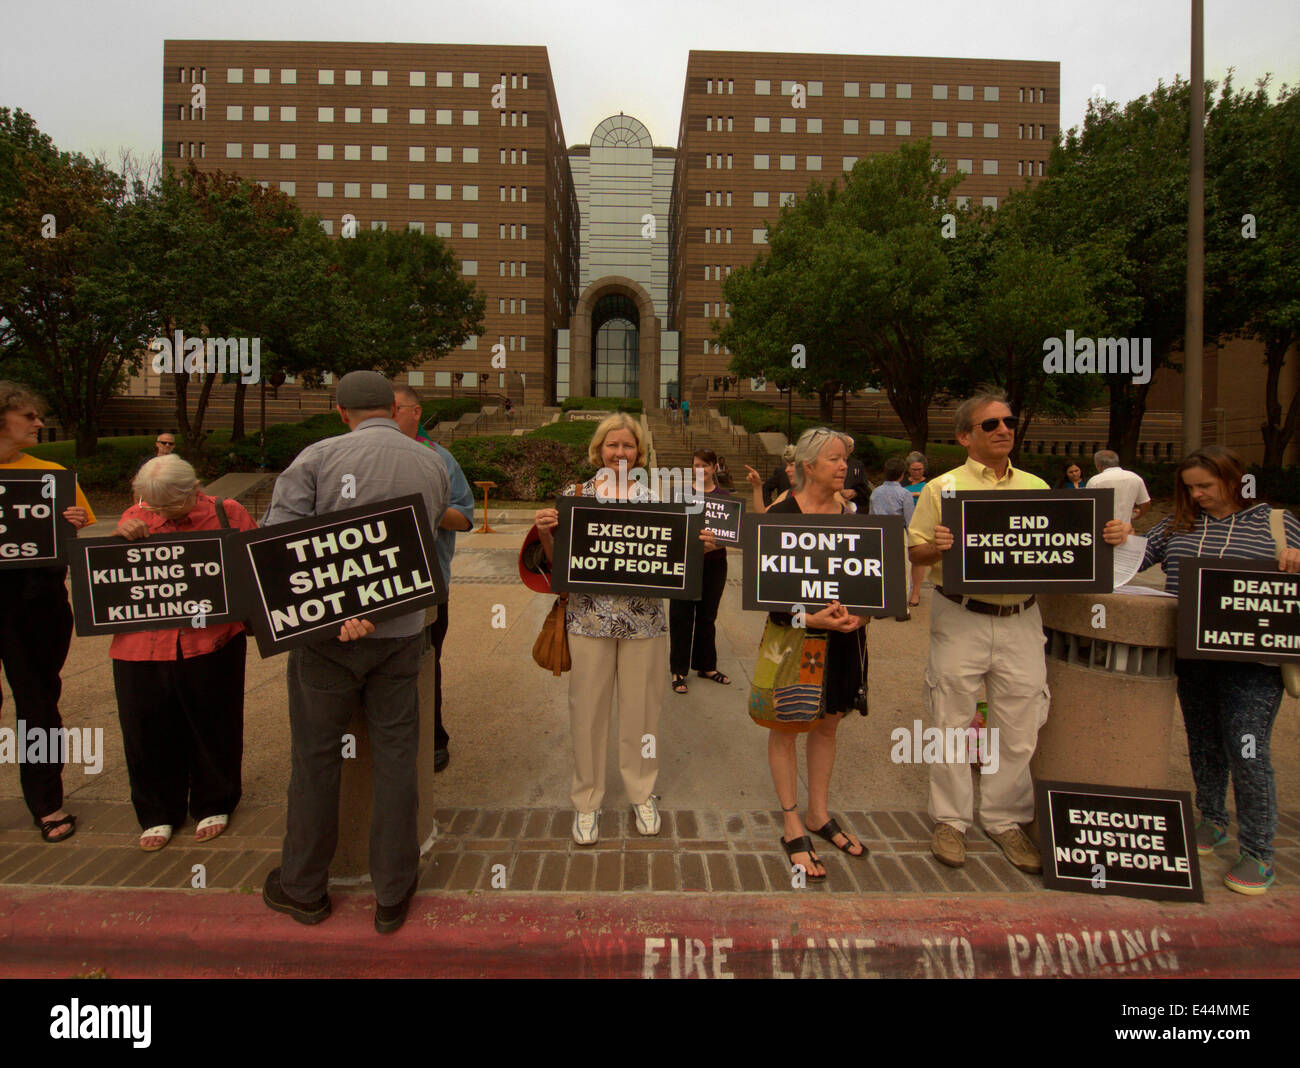 Dallas, Texas, US. 2nd July, 2014. Marking the anniversary of the 1976 U.S. Supreme Court ruling to allow the death penalty. Protesters rallied in front of the Frank Crowley Court House in Dallas. Credit:  J. G. Domke/Alamy Live News Stock Photo